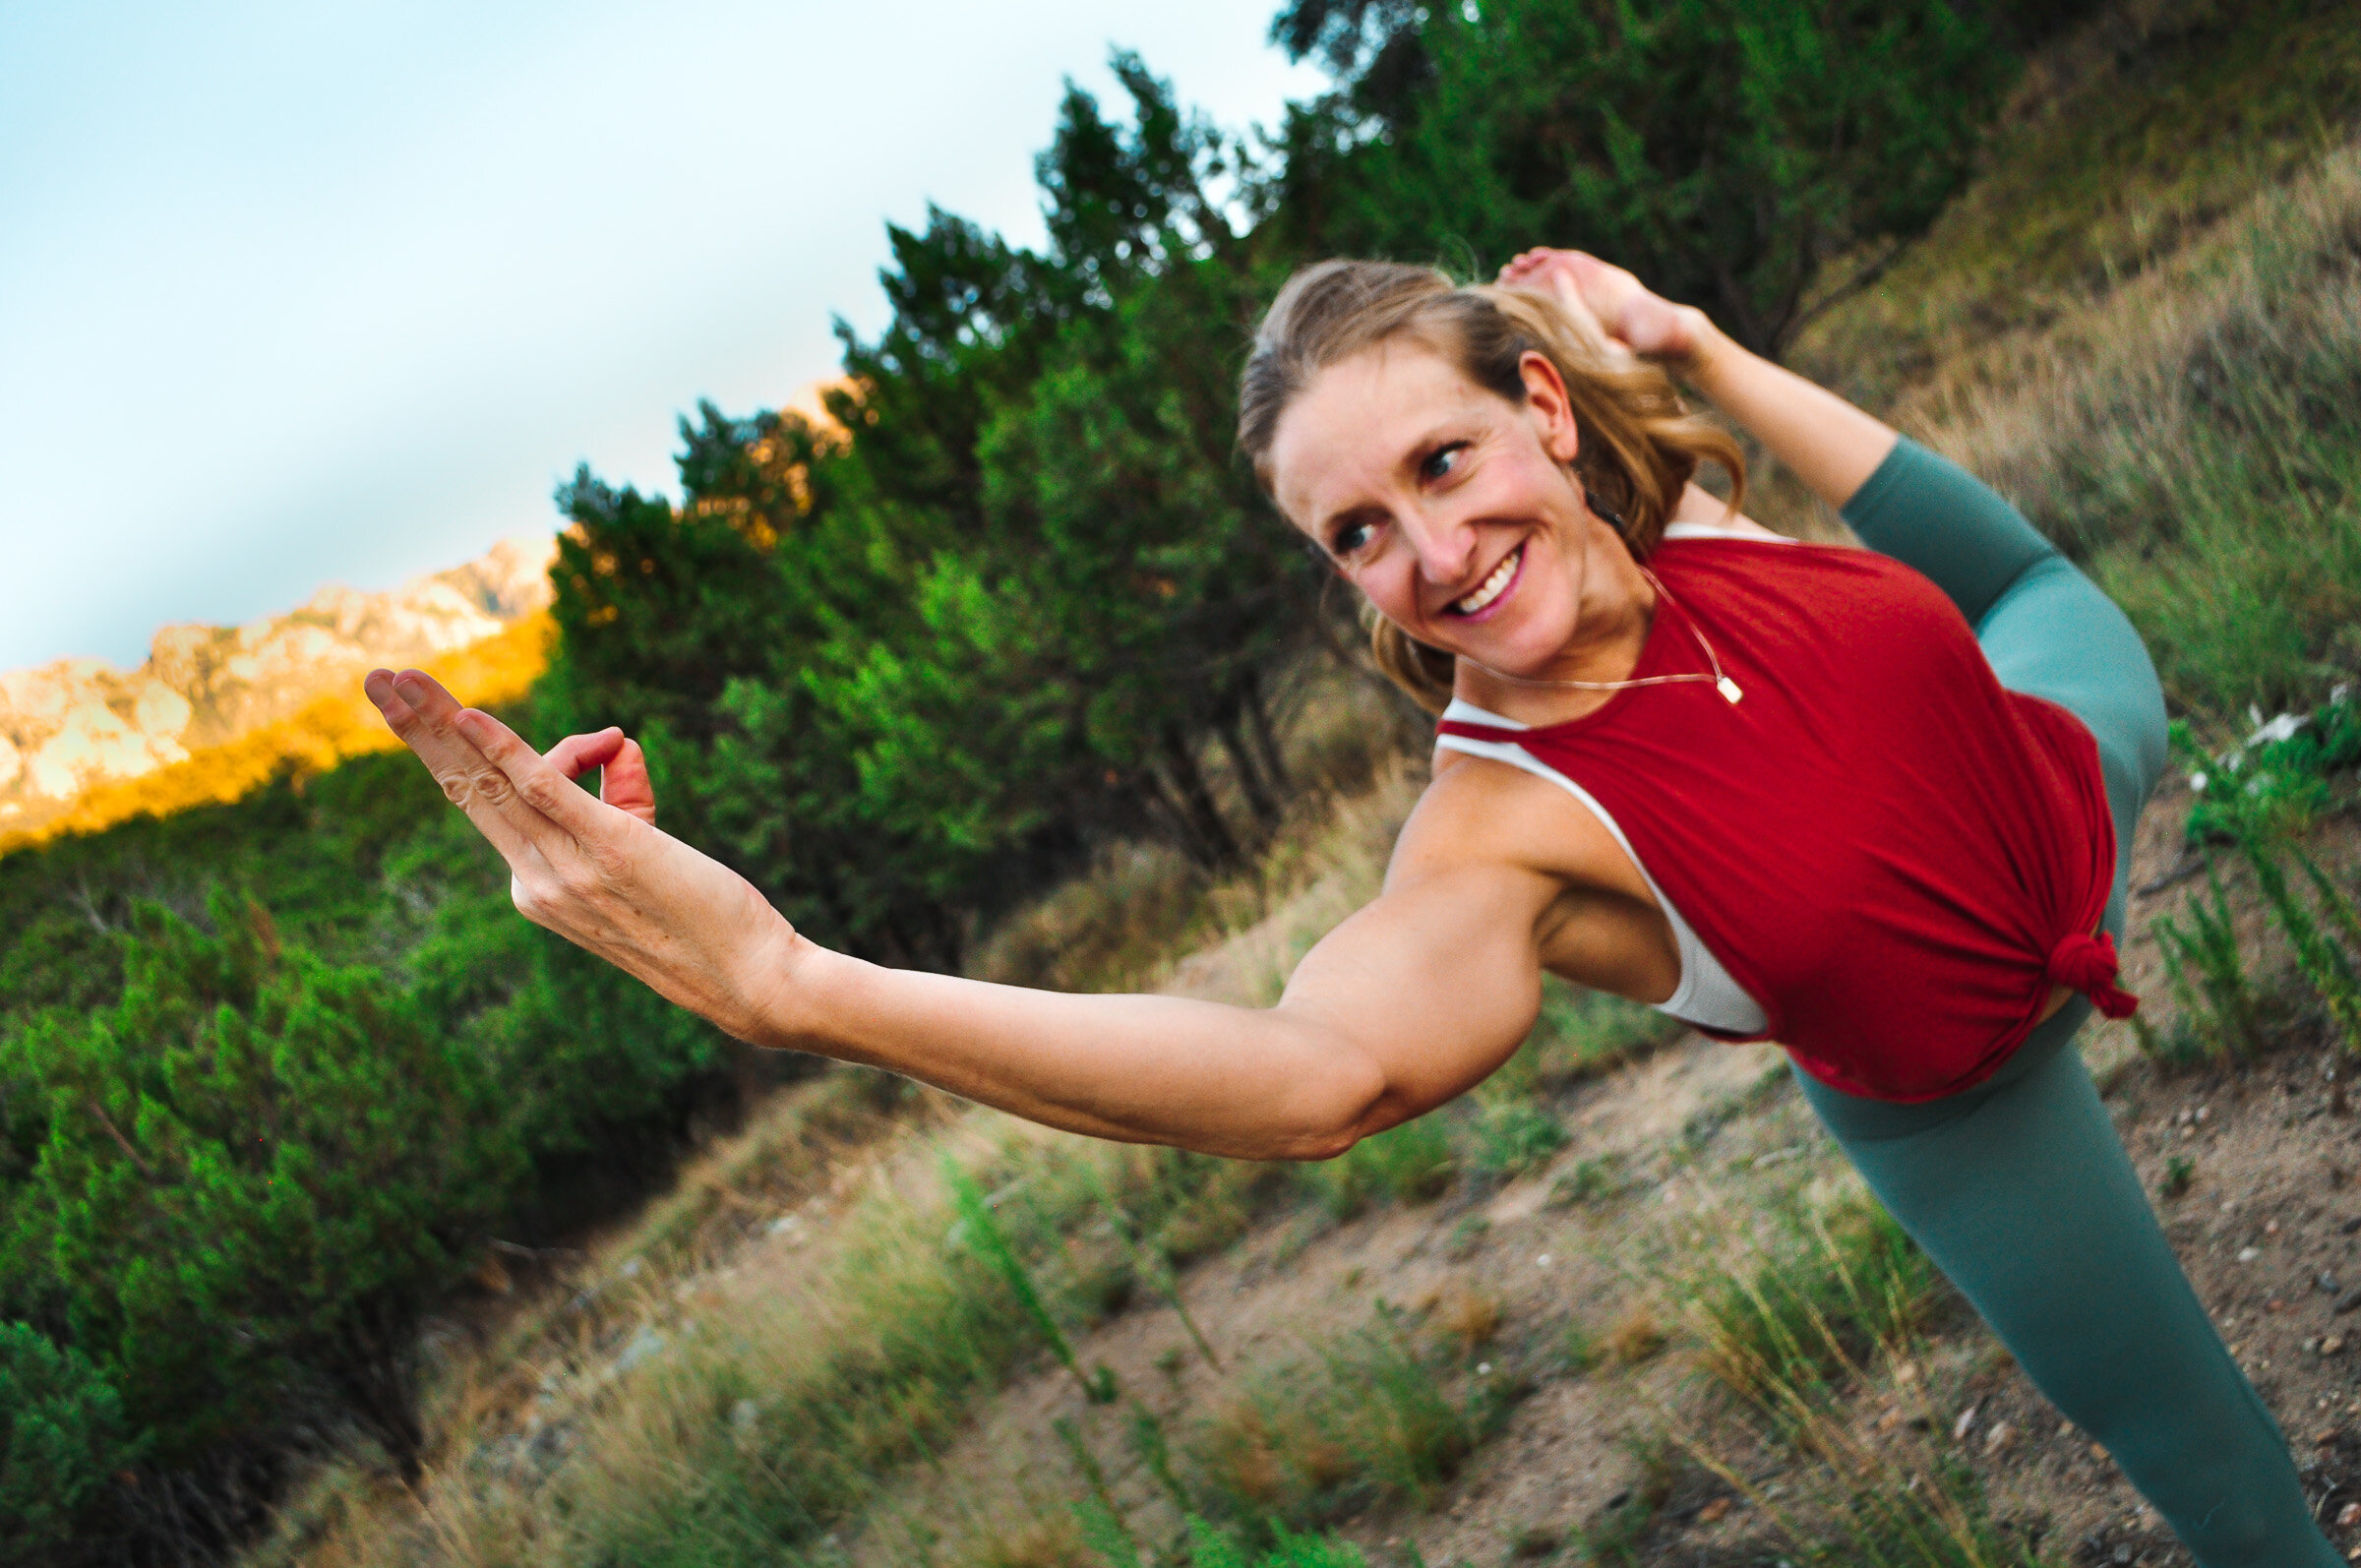 A woman doing a yoga pose in a natural setting